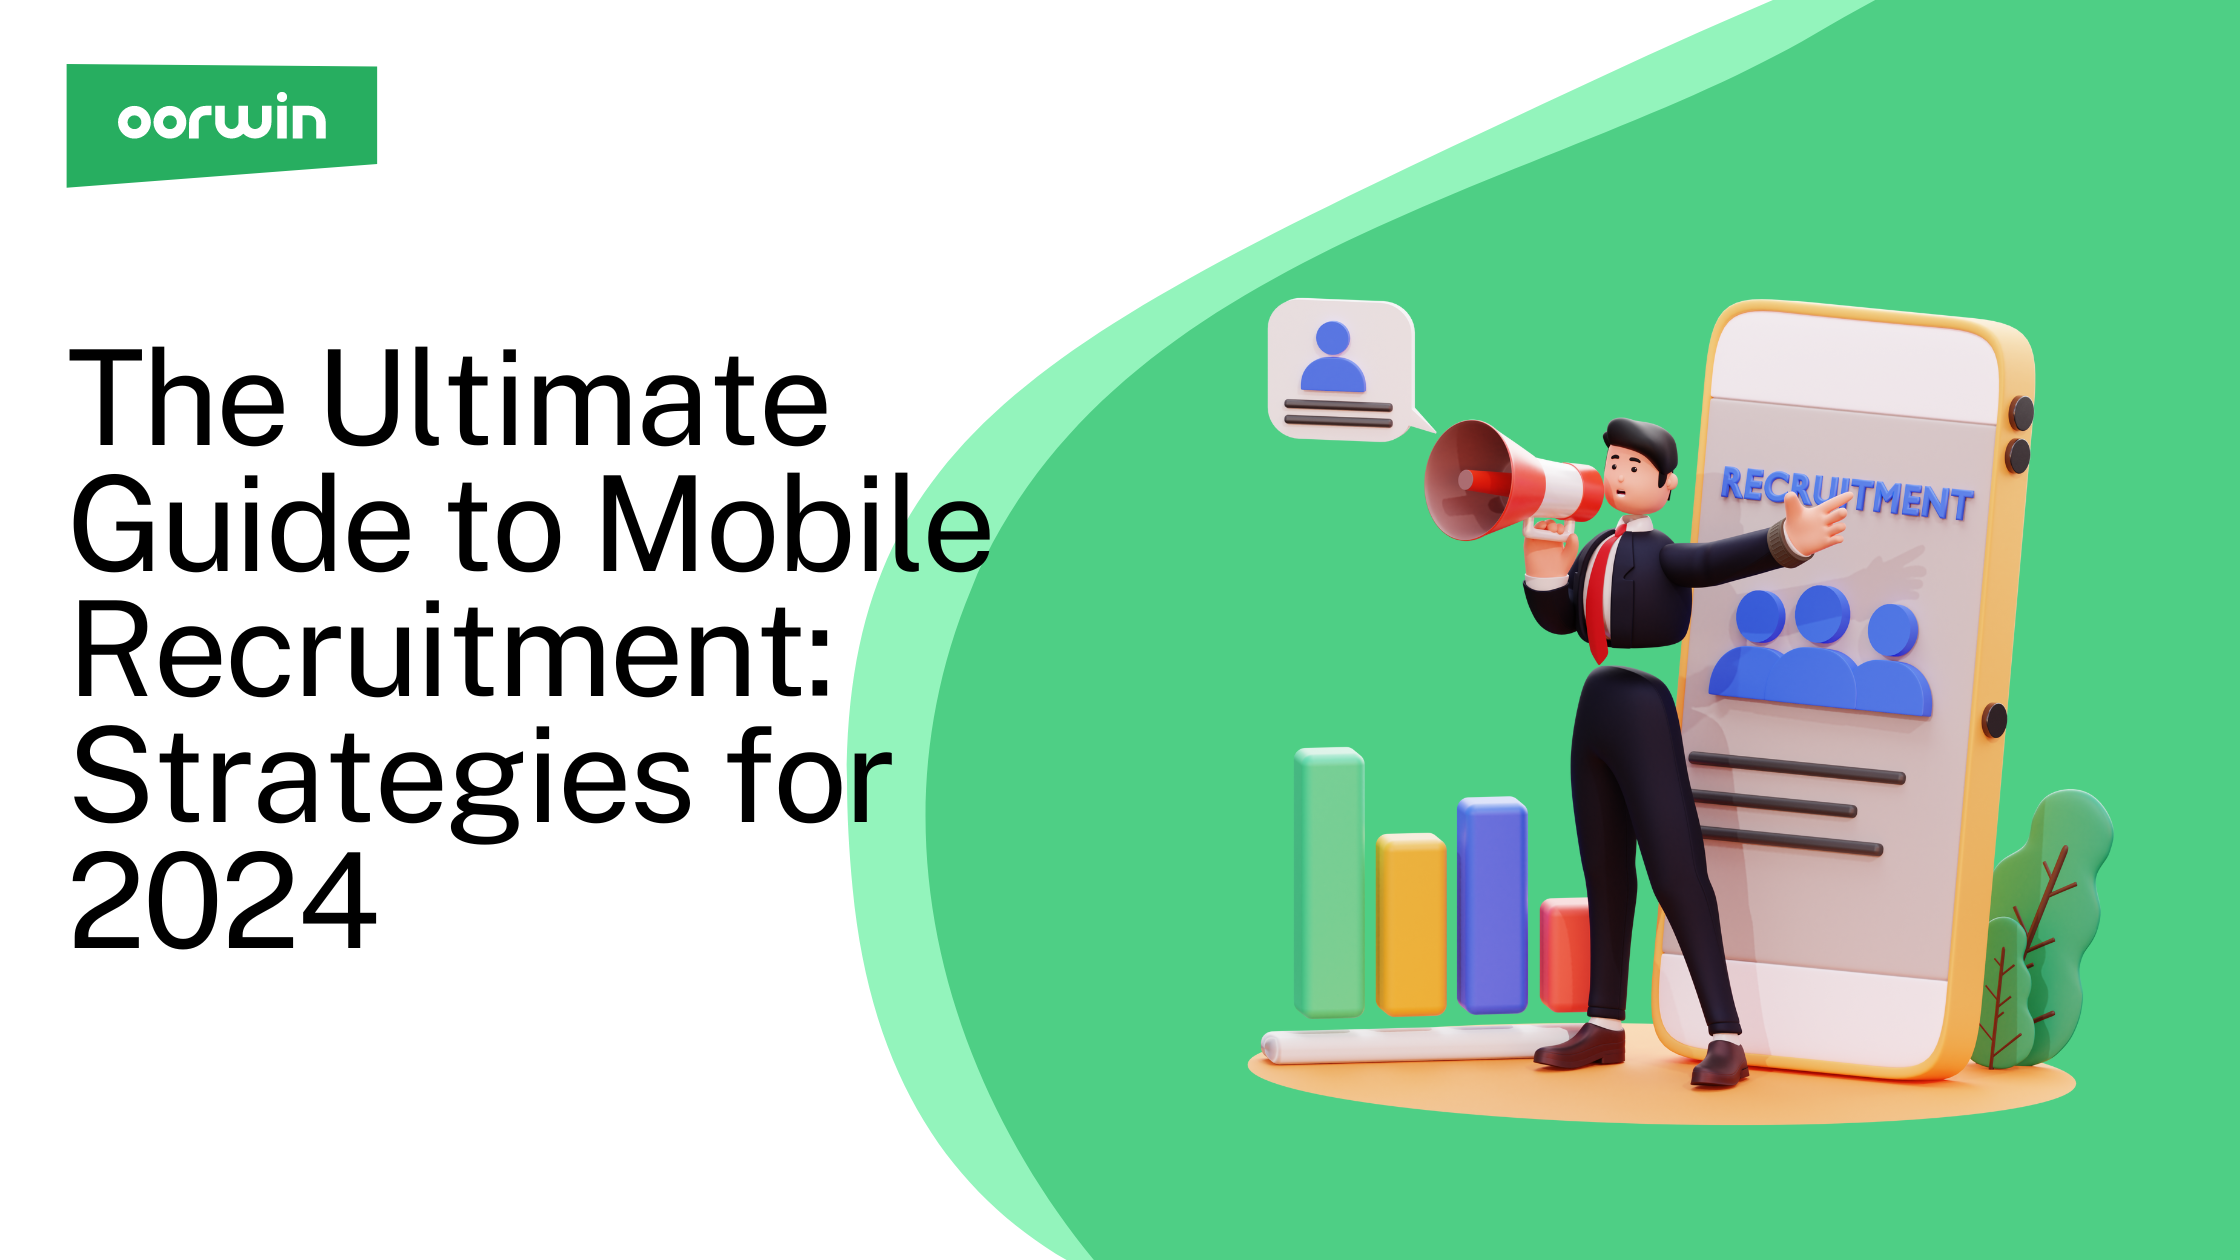 The Ultimate Guide to Mobile Recruitment: Strategies for 2024